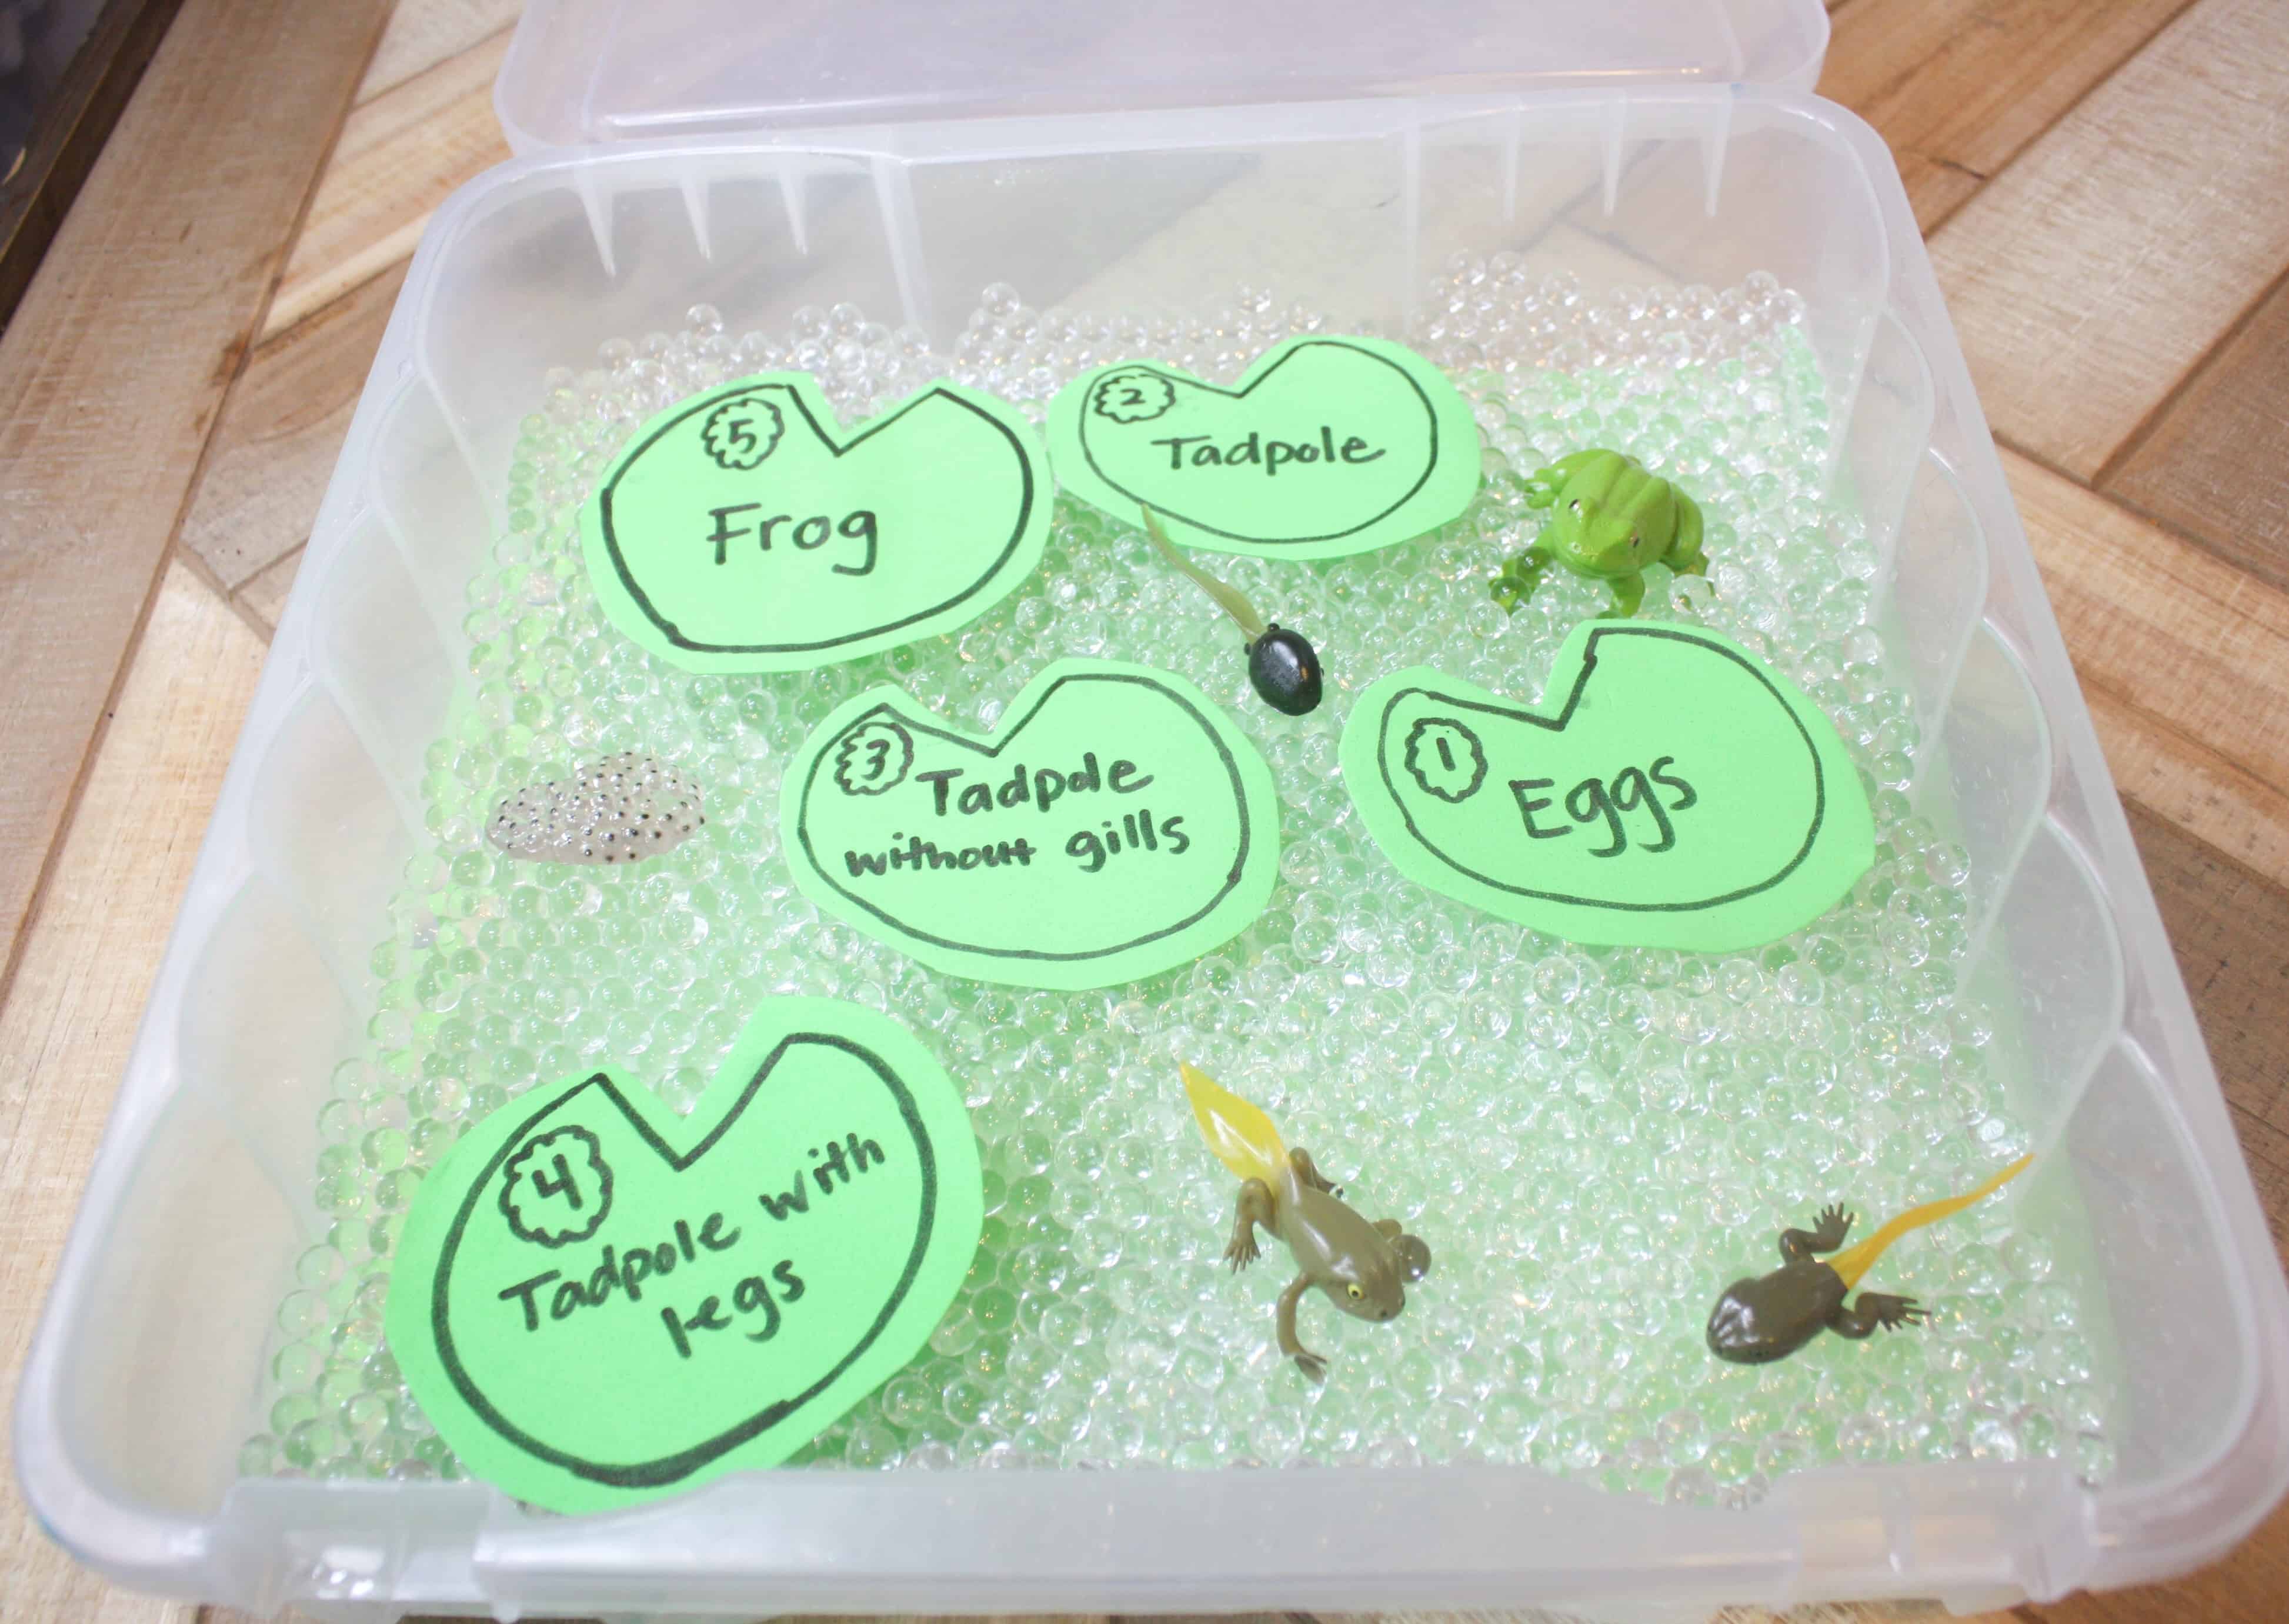 Life Cycle of a Frog for Kids Sensory Bin with Water Bead Frog Eggs